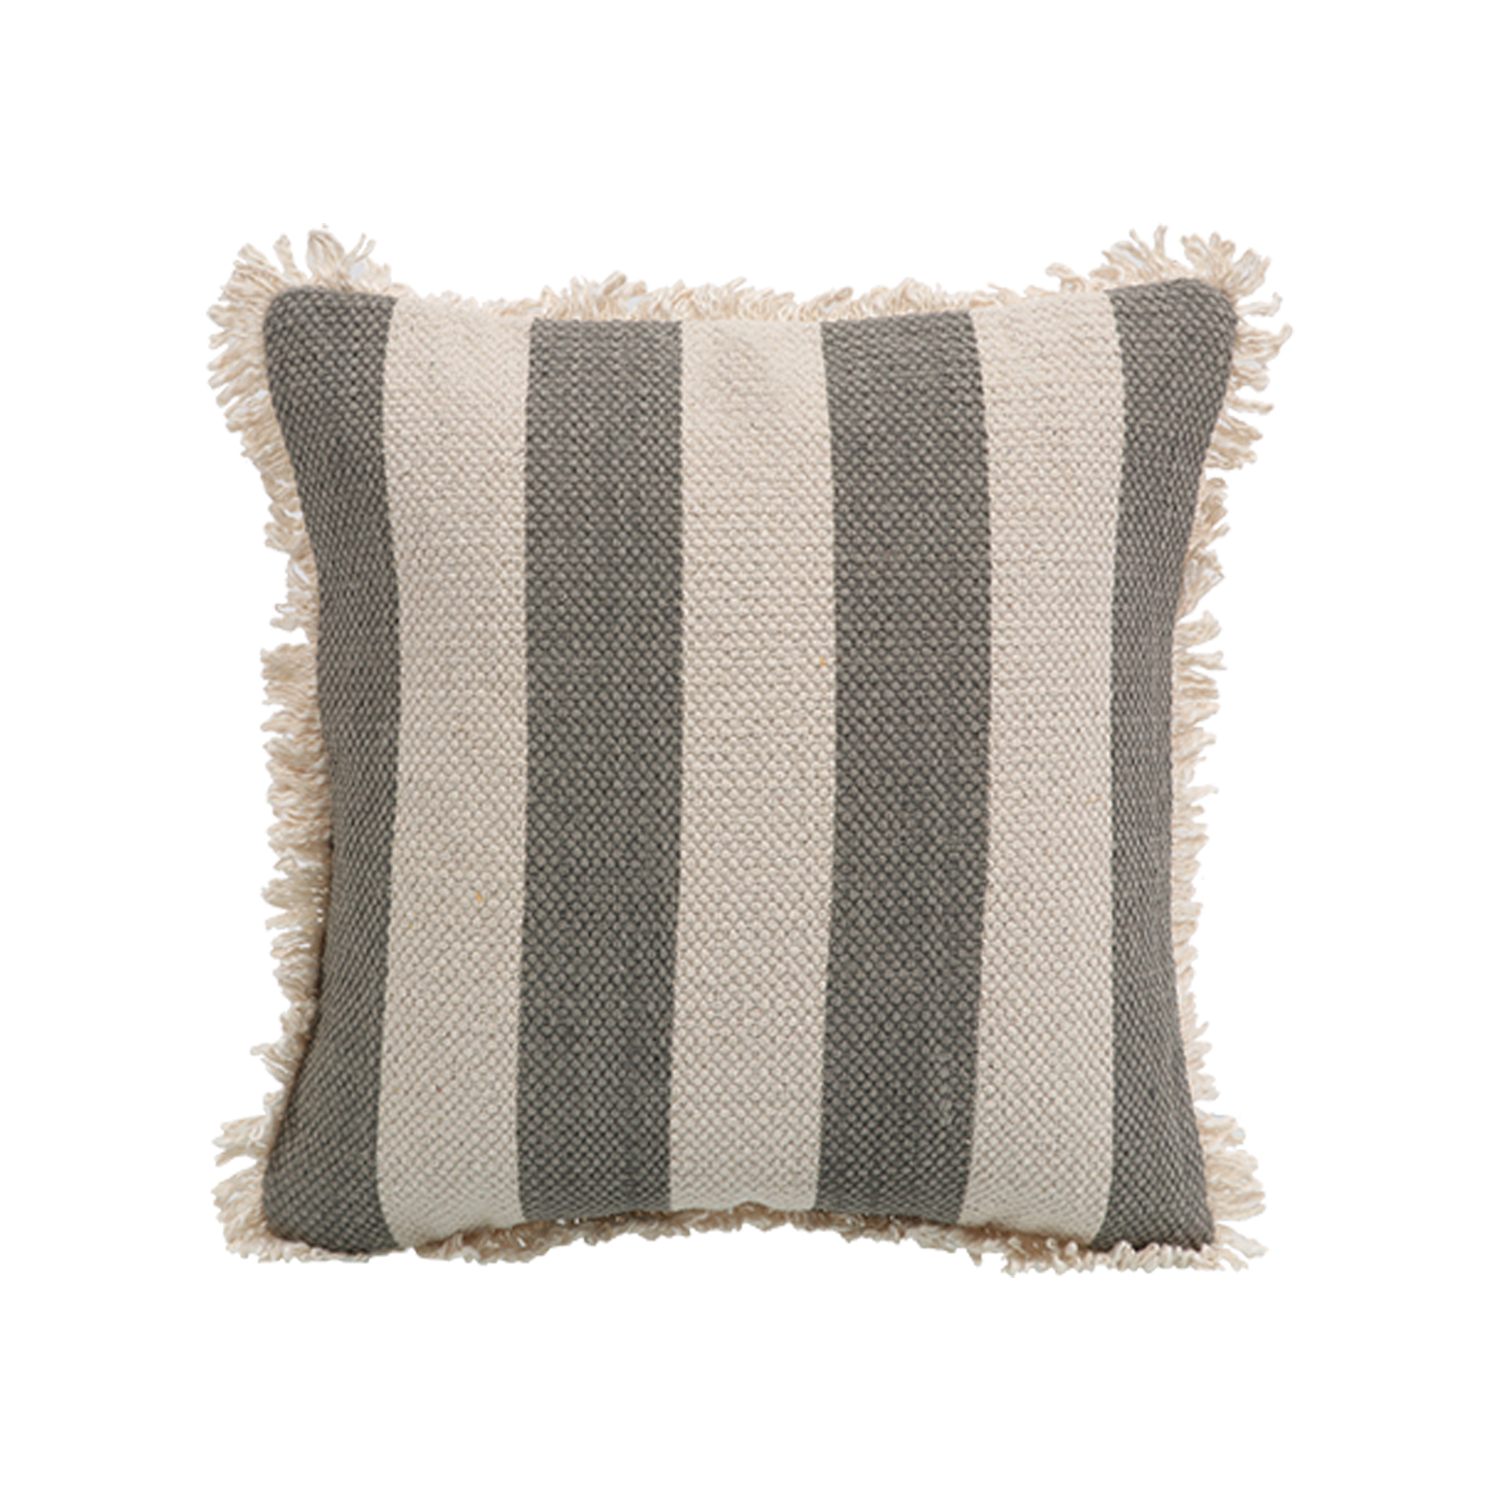 Printed Stripe Dark Gray Cushions Covers with fringes 16X16 Inch